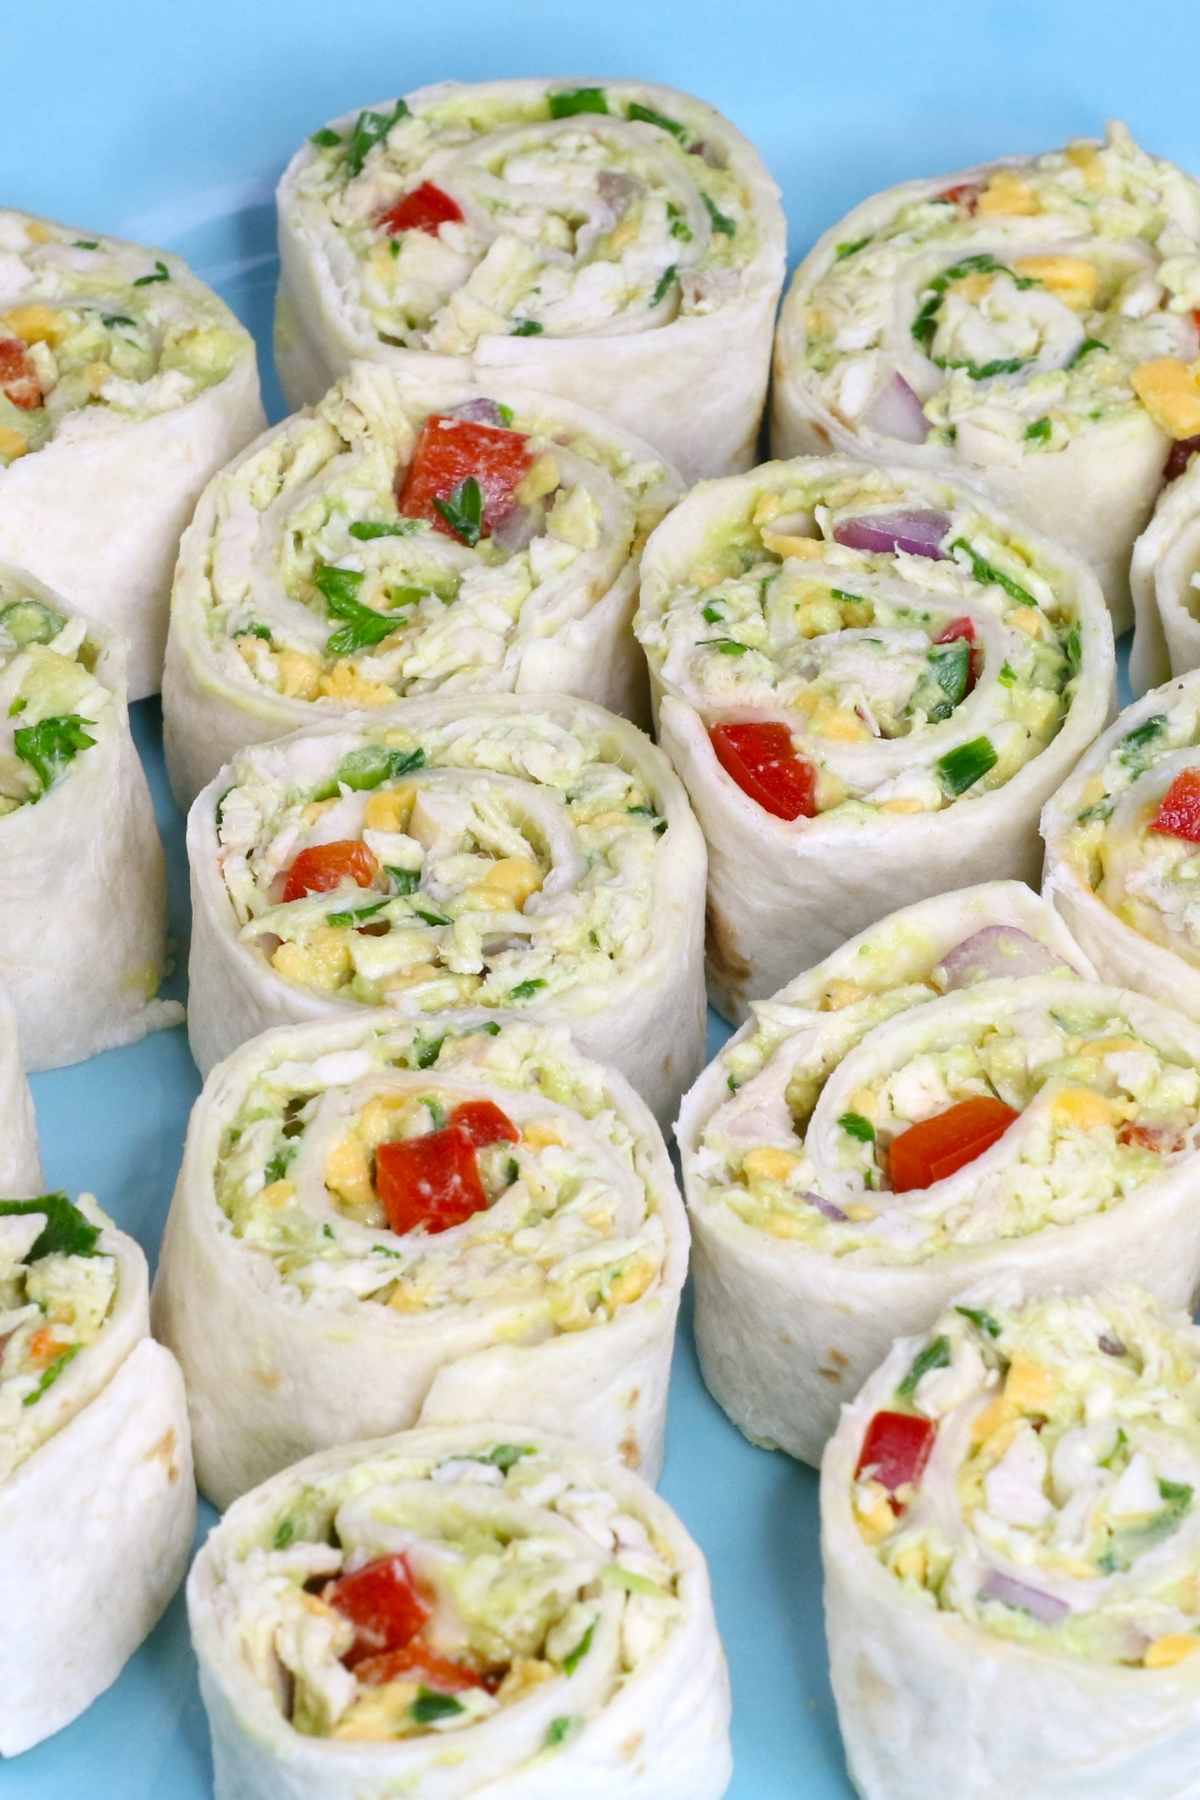 Cream cheese tortilla roll ups are an easy and convenient solution for parties, lunches, and snacks! They’re super easy to make and can be customized to suit your taste.